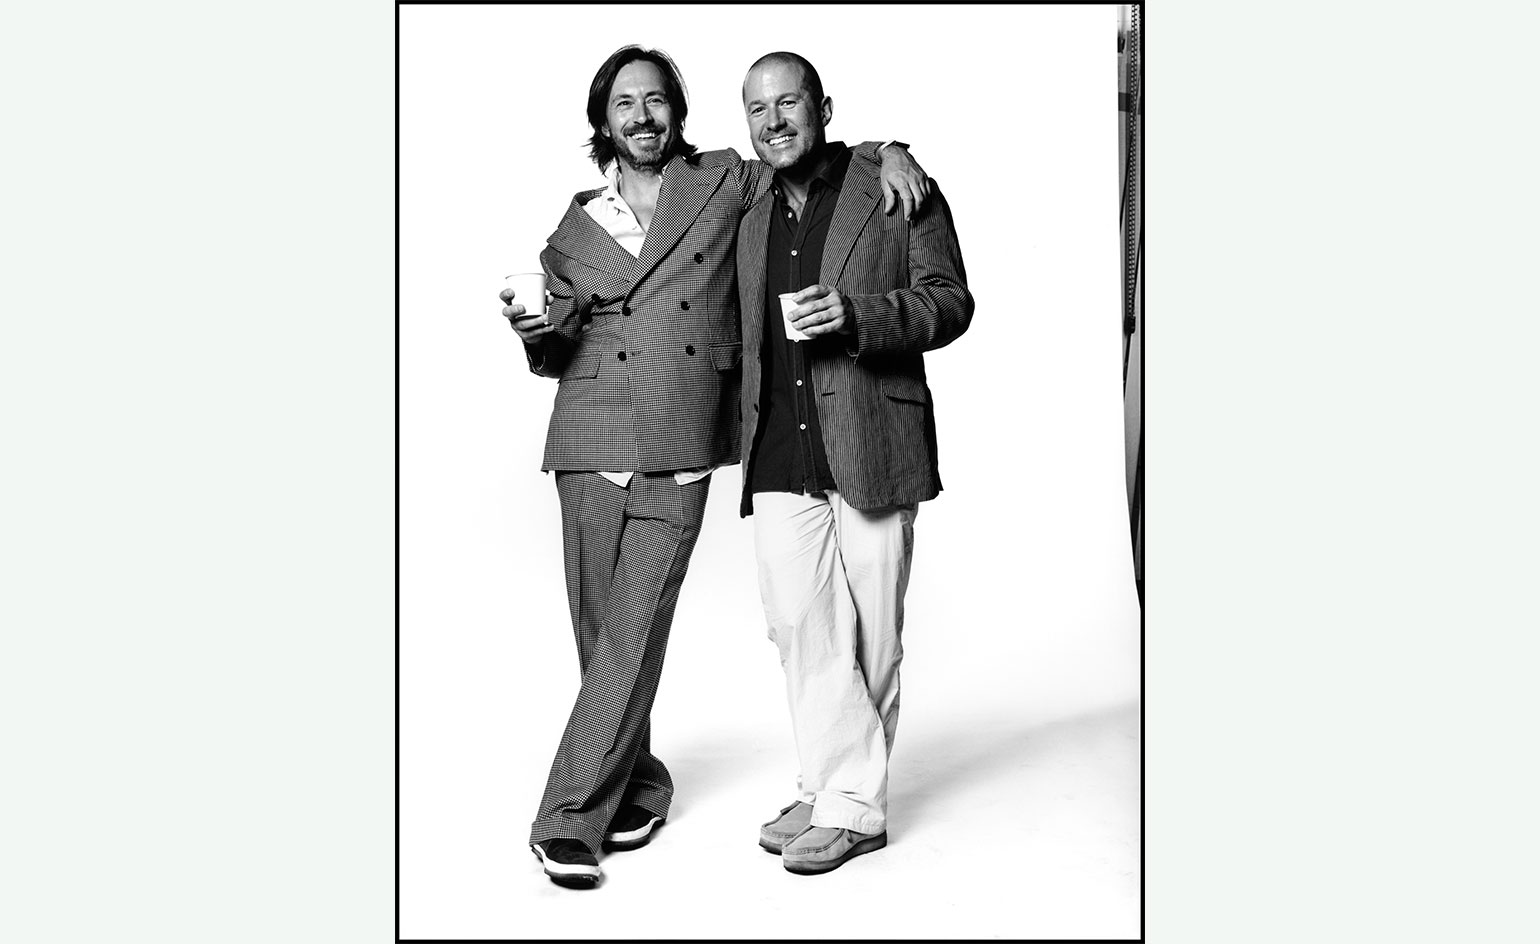 Apple's Jony Ive and Designer Marc Newson on Their Shared “Level